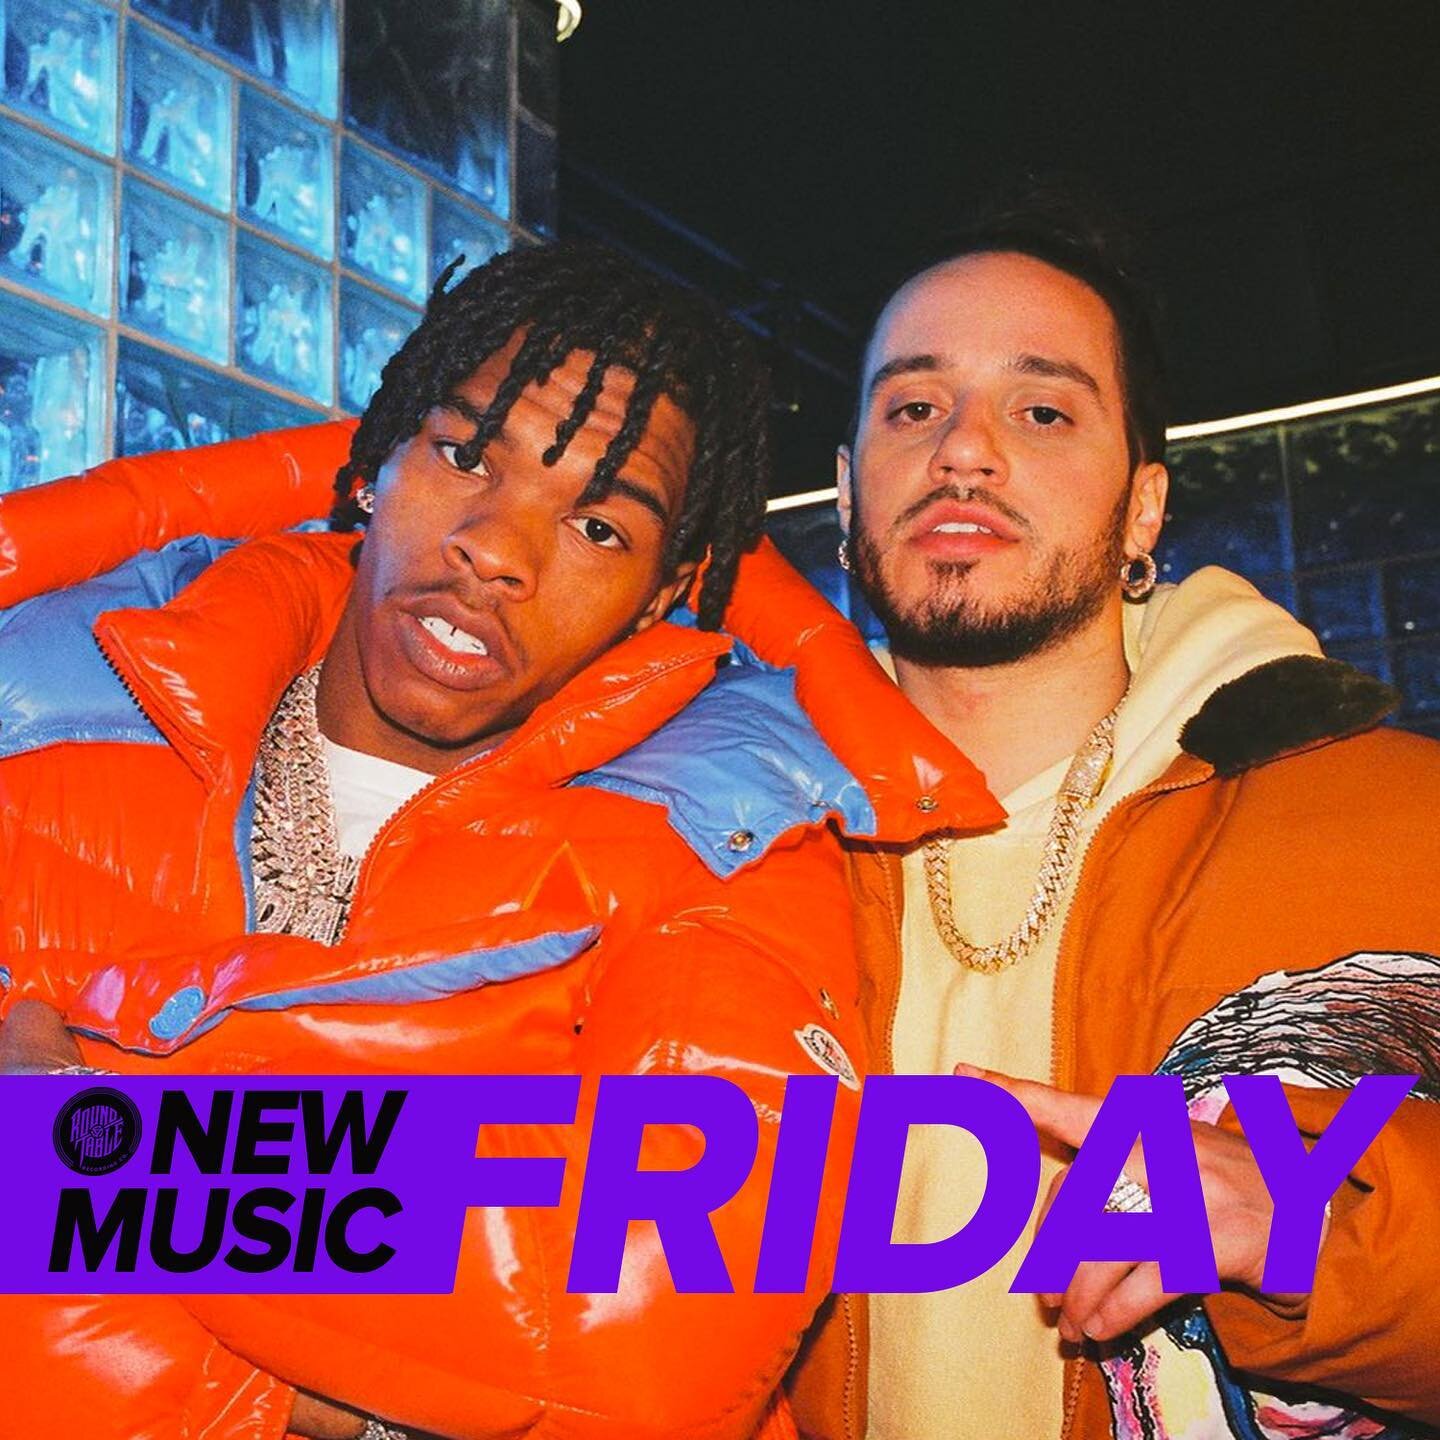 We&rsquo;re very excited to launch our own New Music Friday every week on Spotify. Highlighting top releases and emerging artists, we&rsquo;re here to put you on hits early.

Head over to our Spotify (link in bio) and follow that, along with more pla